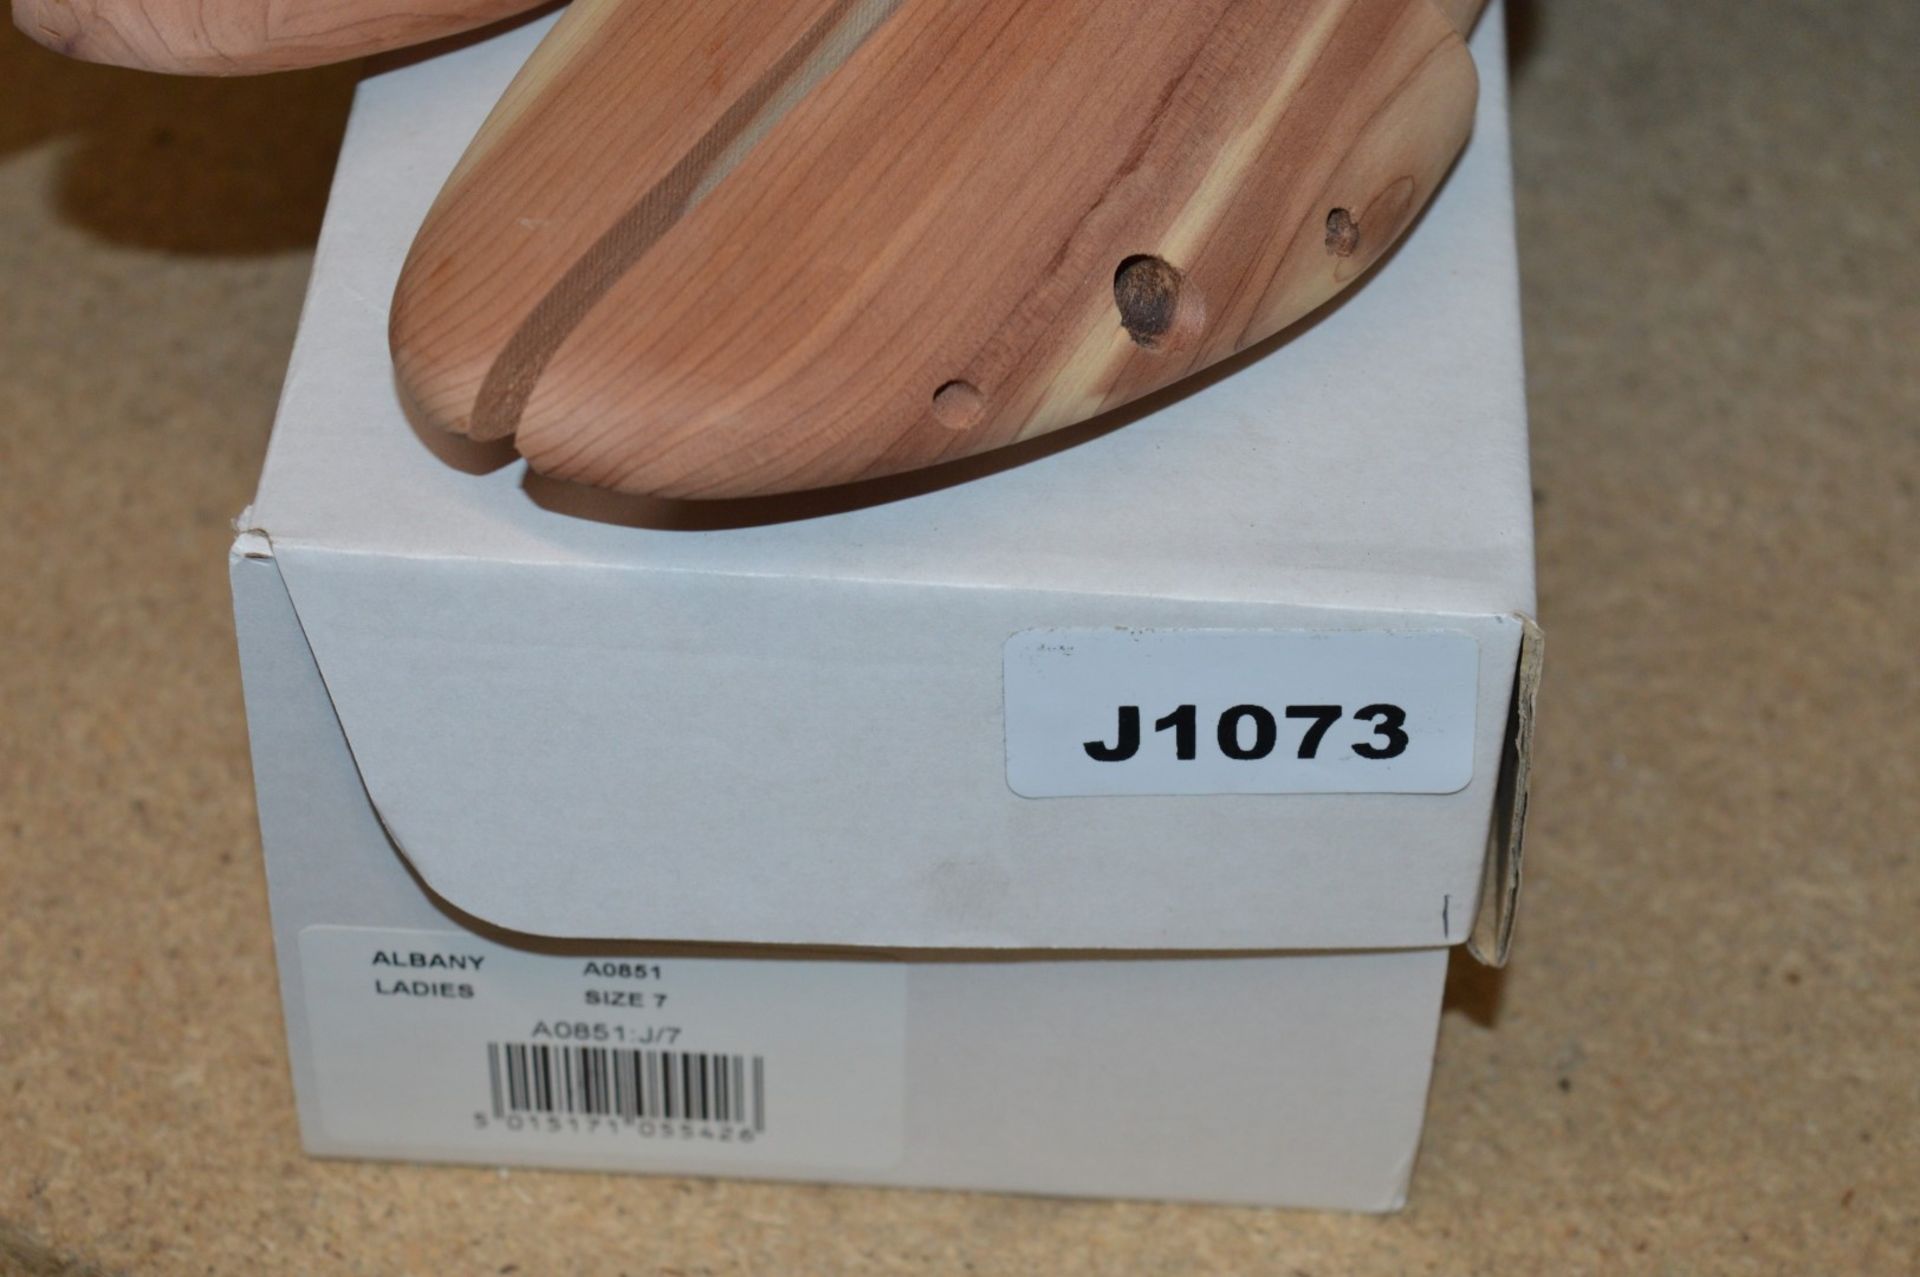 1 x Jones Bootmaker Albany Ladies Wooden Shoe Shaper - Size 7 - New and Boxed - CL285 - Ref - Image 4 of 4